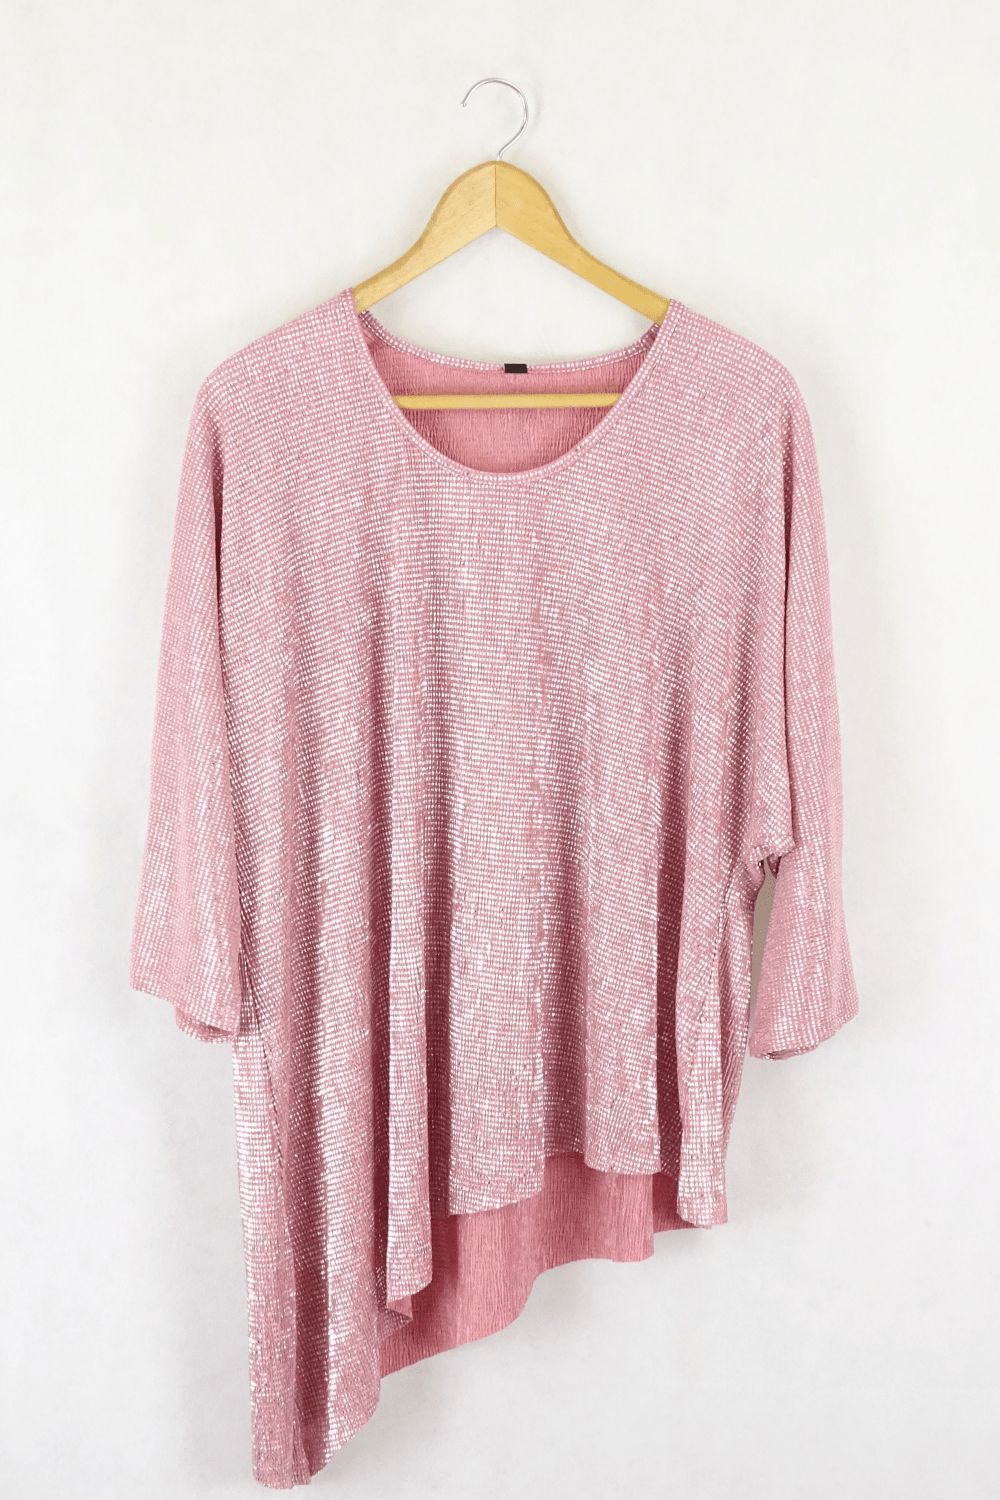 Taking Shape TS Pink And Silver Textured Blouse S